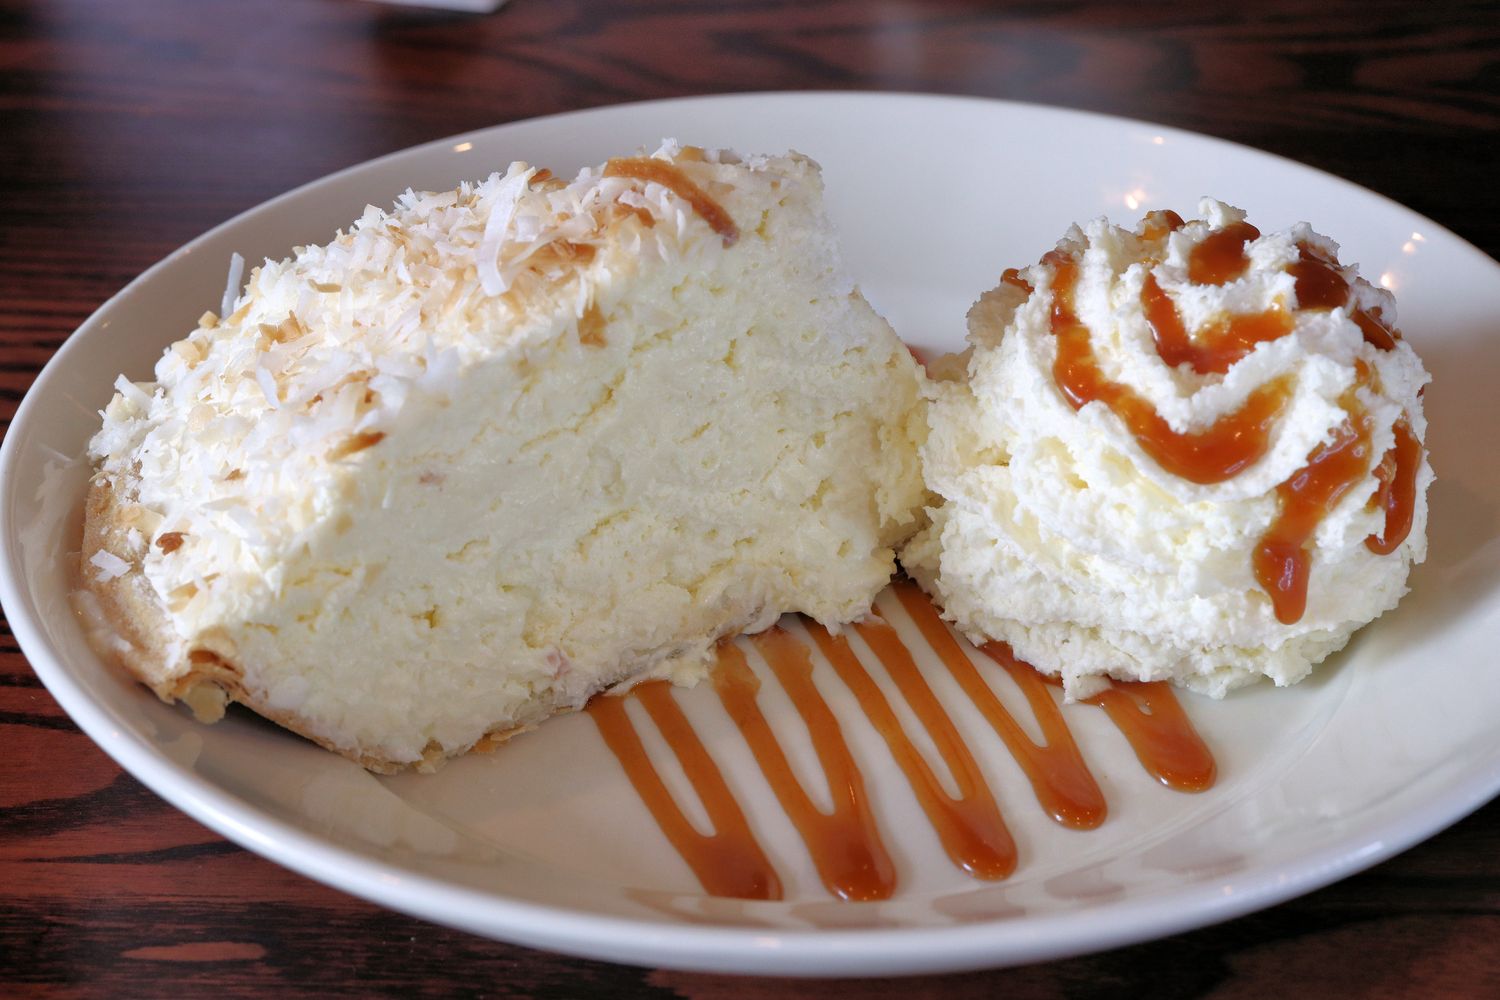 Coconut Cream Pie topped with whipped cream, salted caramel drizzle, and a sprinkle of toasted coconut.